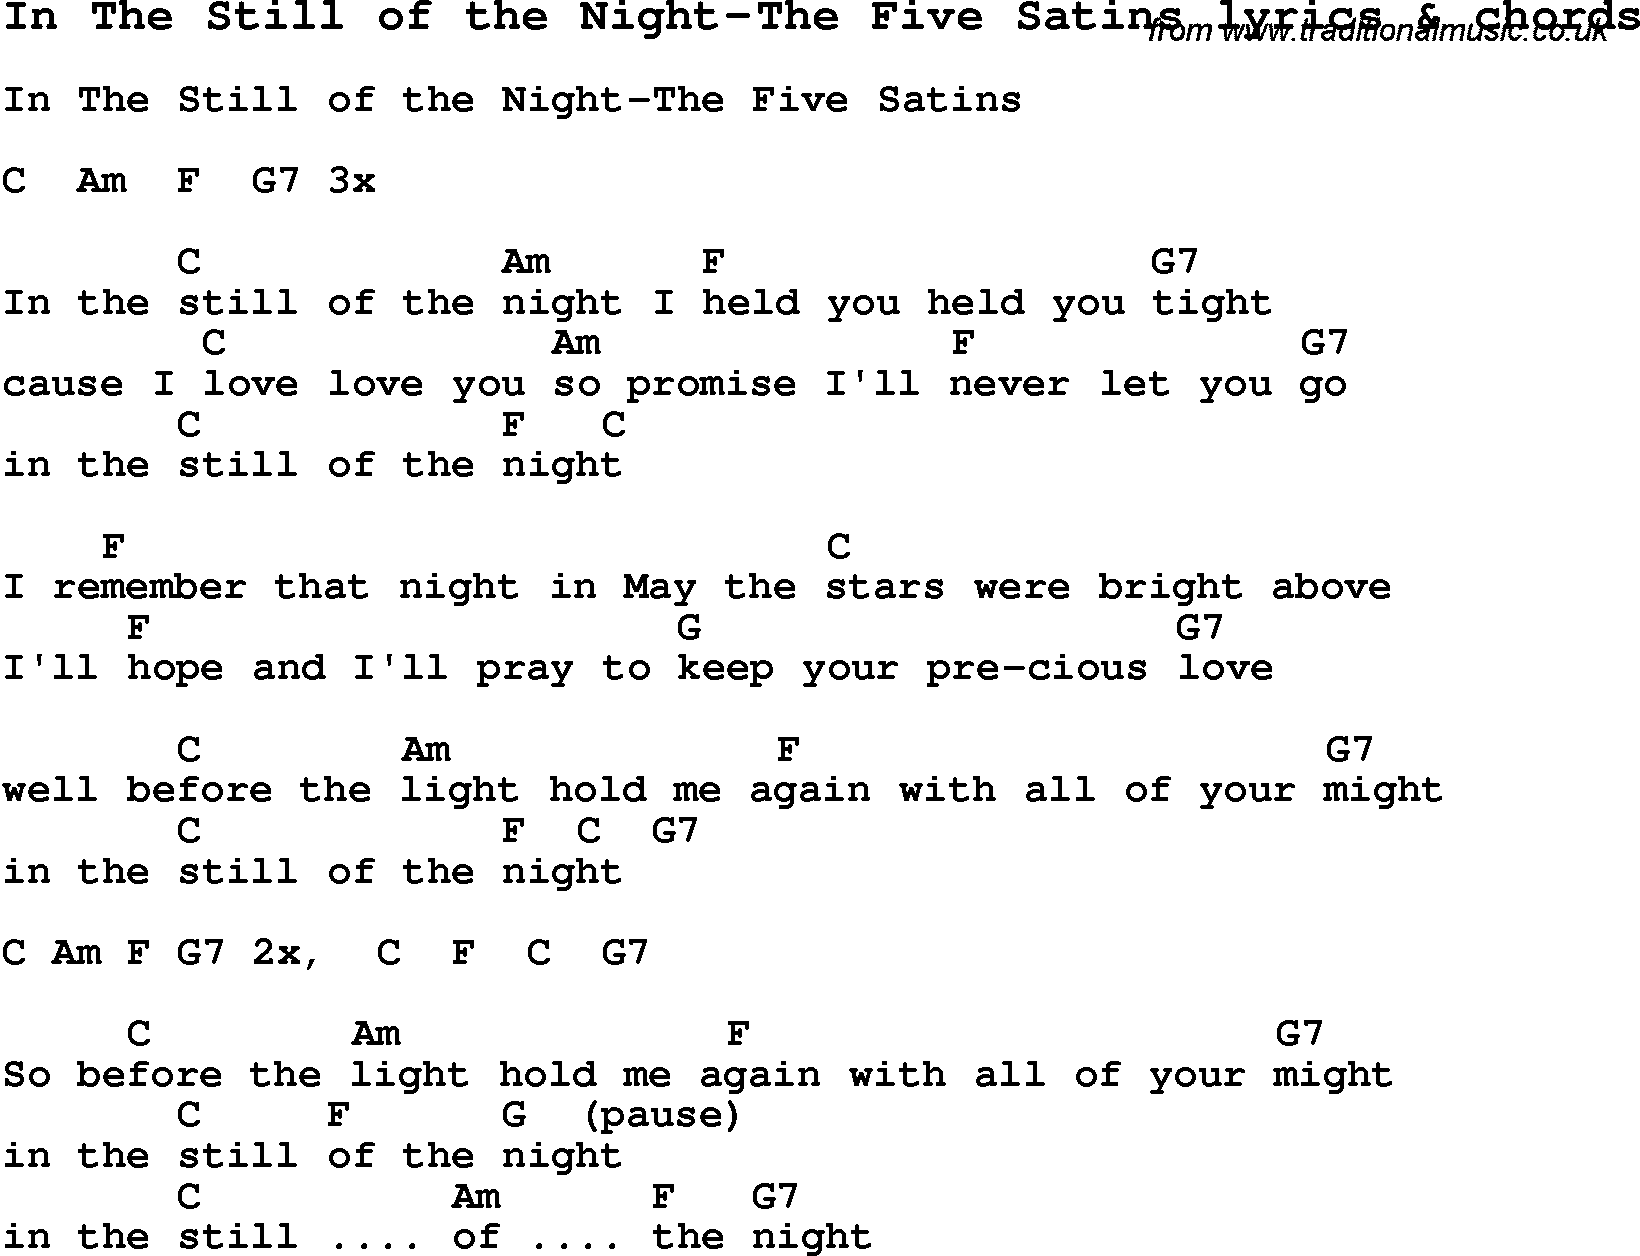 Love Song Lyrics for: In The Still of the Night-The Five Satins with chords for Ukulele, Guitar Banjo etc.